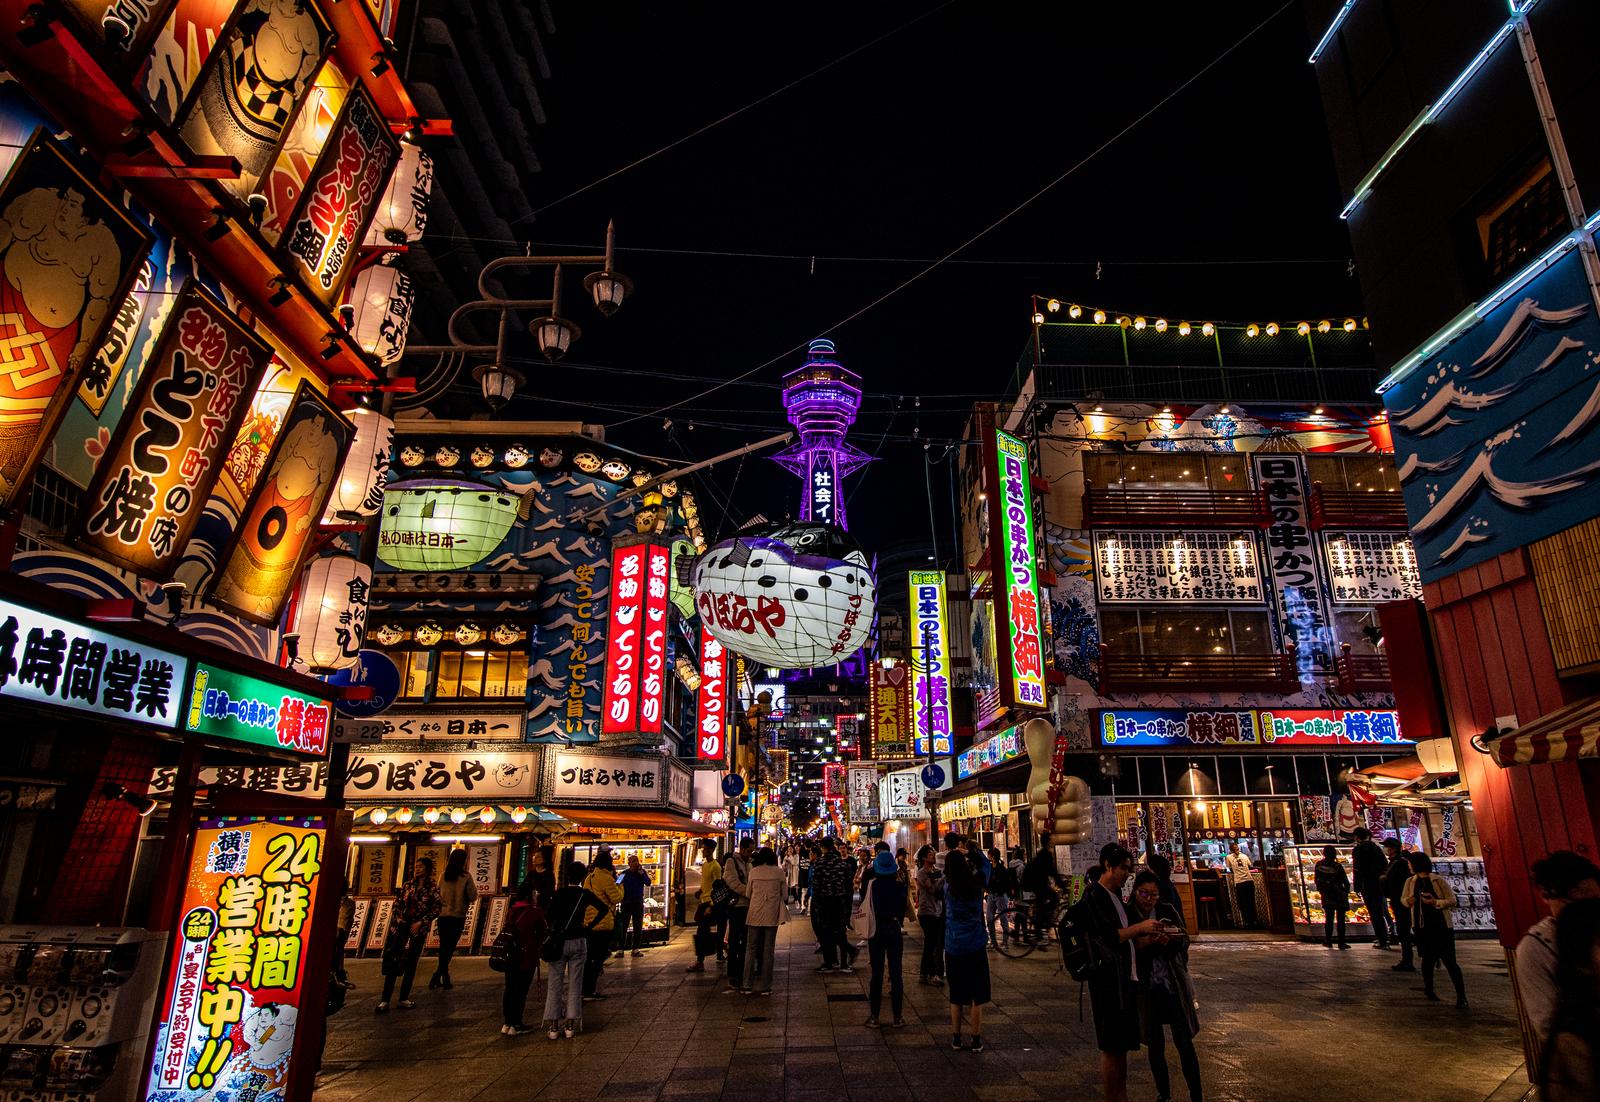 Name That City! Put Your Travel Knowledge to Test With This Picture Quiz! Osaka, Japan